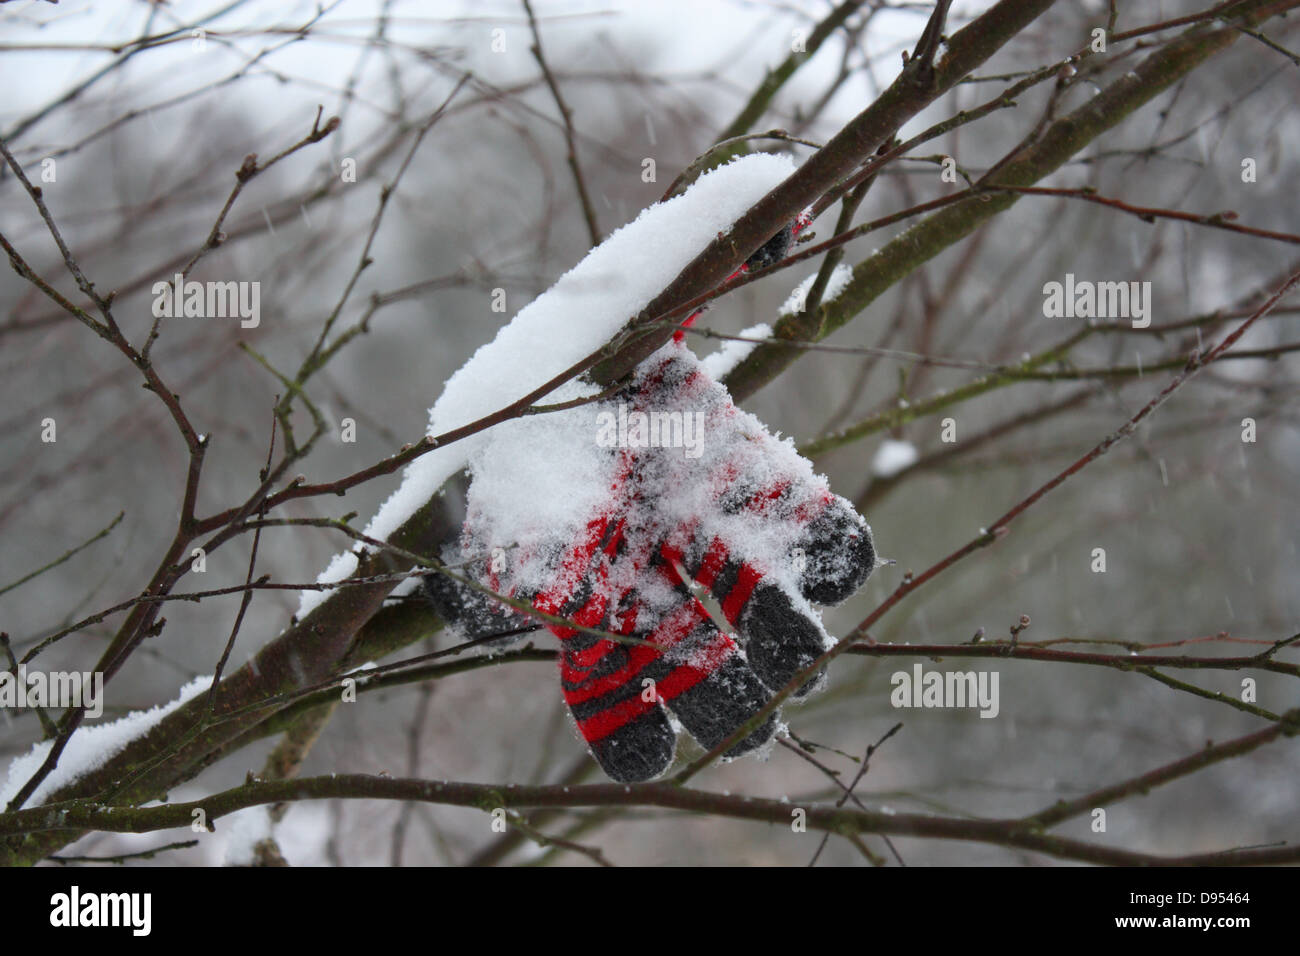 Lost Snowy Glove in a Tree Stock Photo